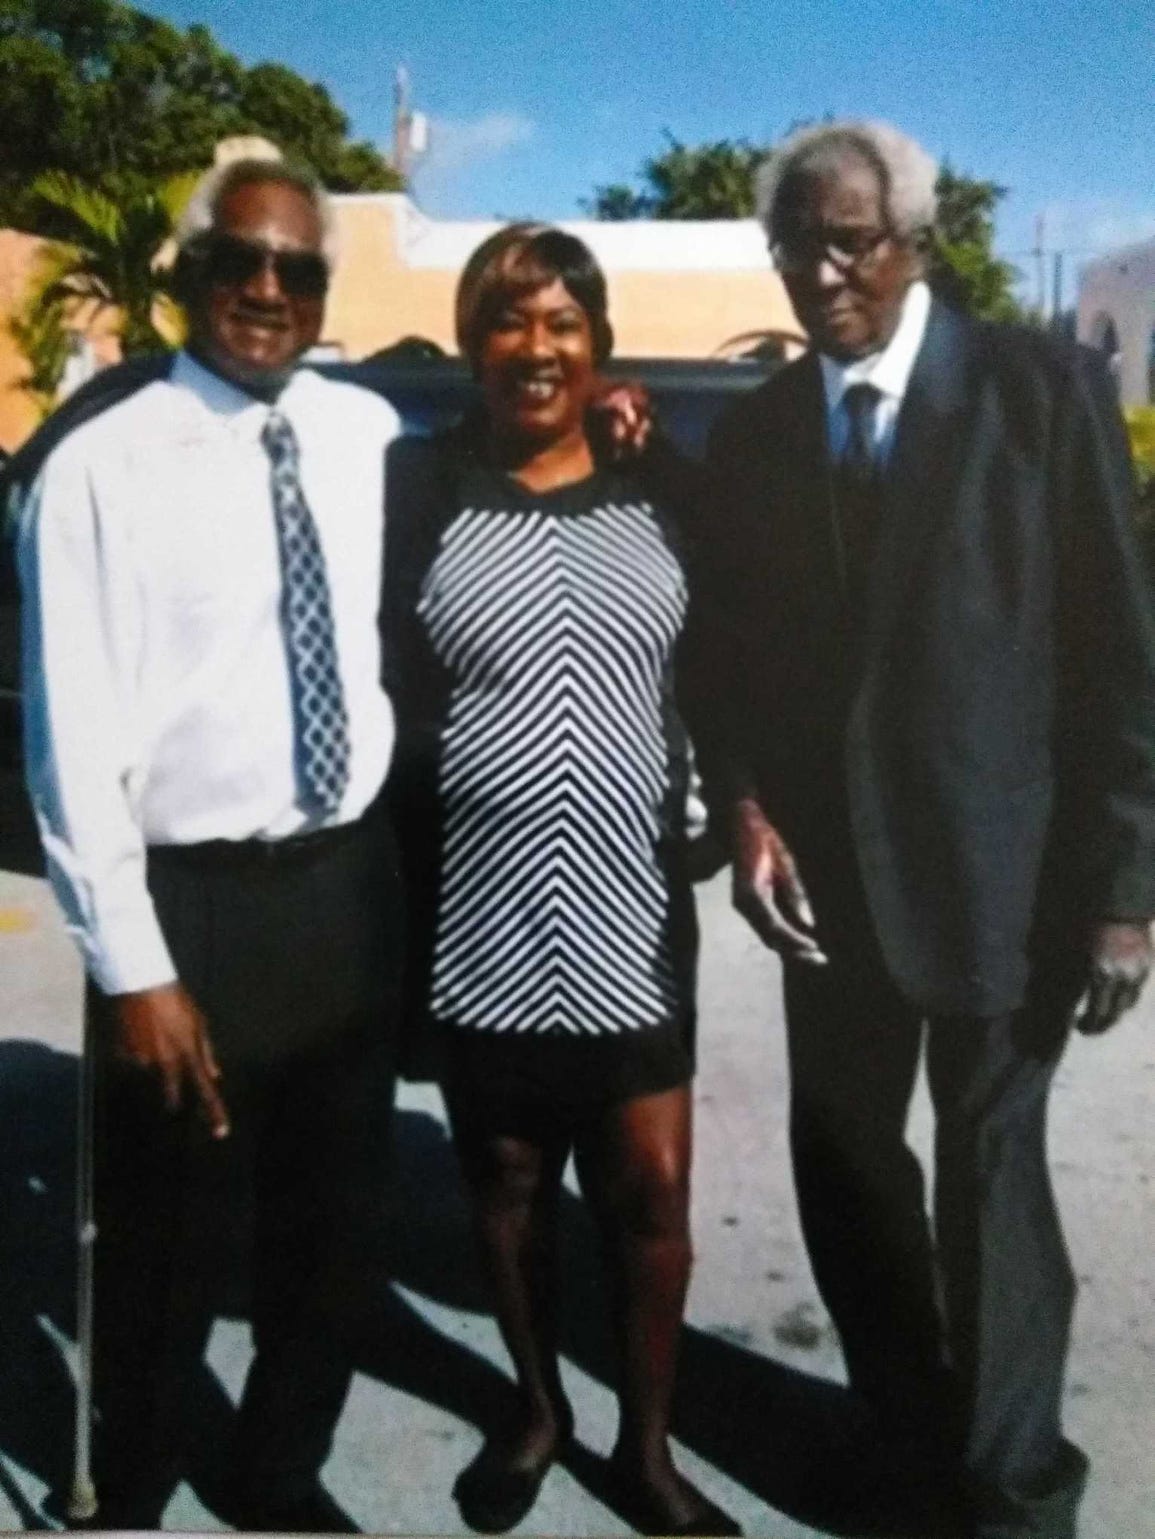 Coleman Felts, right, with his brother Larry McFarley and sister Toni McFarley. Felts wandered from the Golden Glades Nursing and Rehabilitation Center in Miami in December 2015 and drowned in a lake.